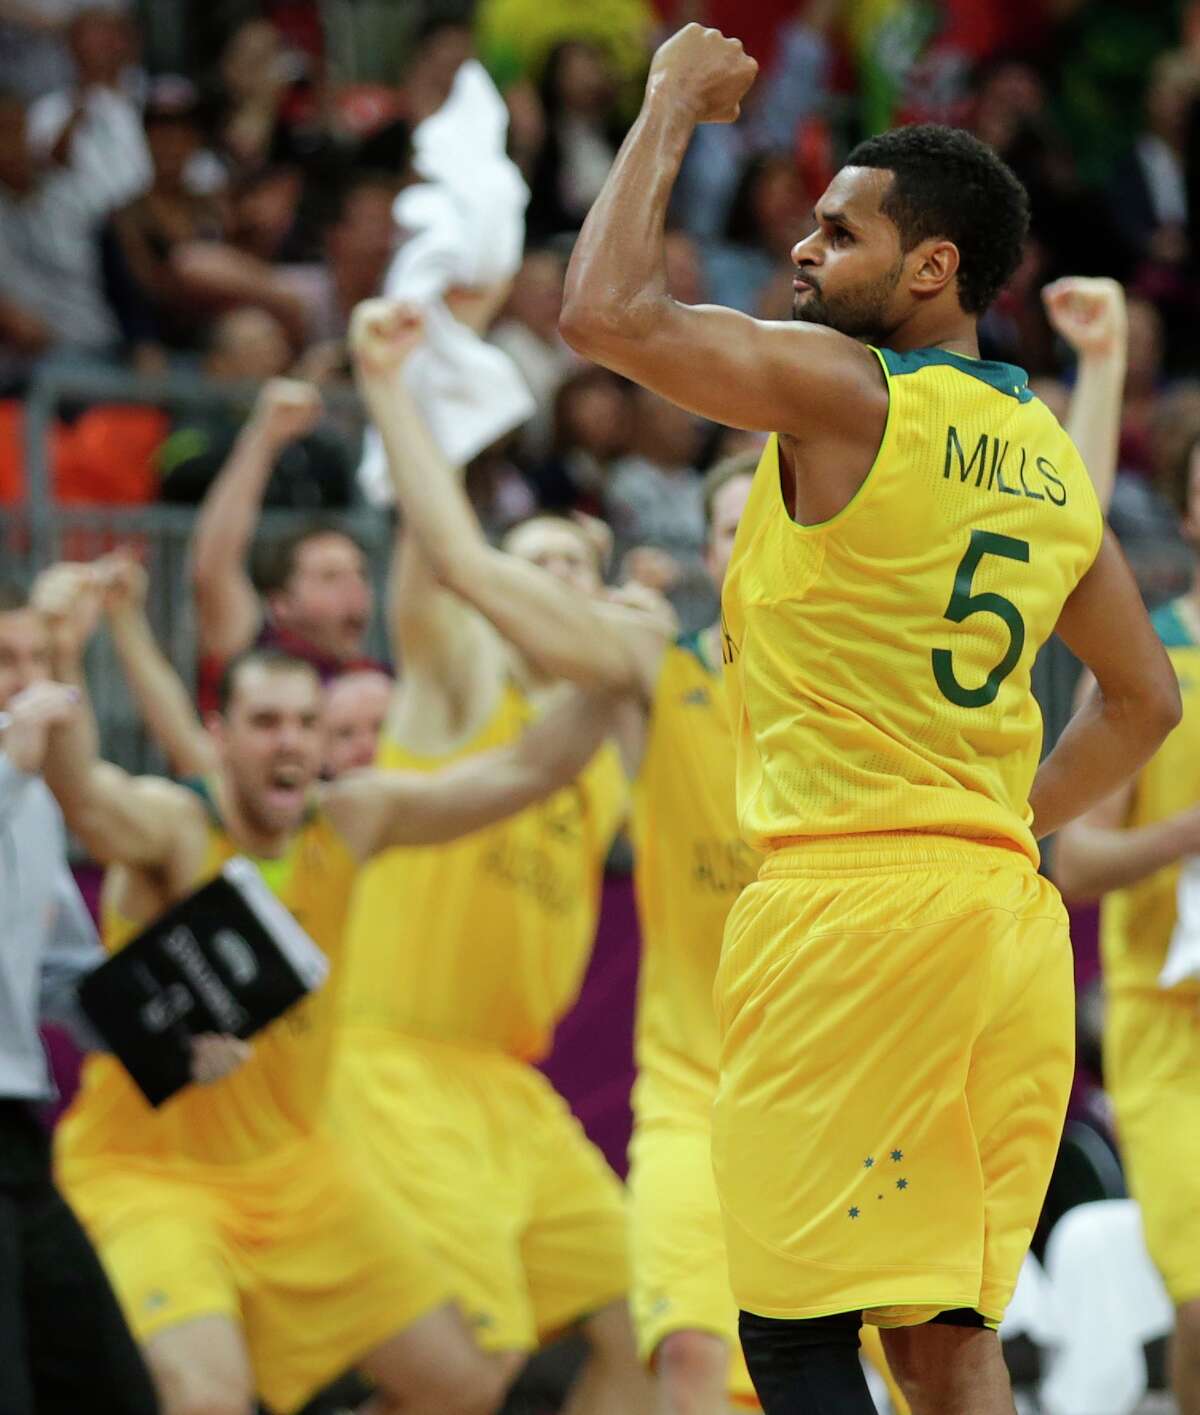 Australia's Patrick Mills pumps his fist after hitting the game-winning 3-point shot to pull ahead of Russia with time expiring during a men's basketball game at the 2012 Summer Olympics, Monday, Aug. 6, 2012, in London.(AP Photo/Charles Krupa)